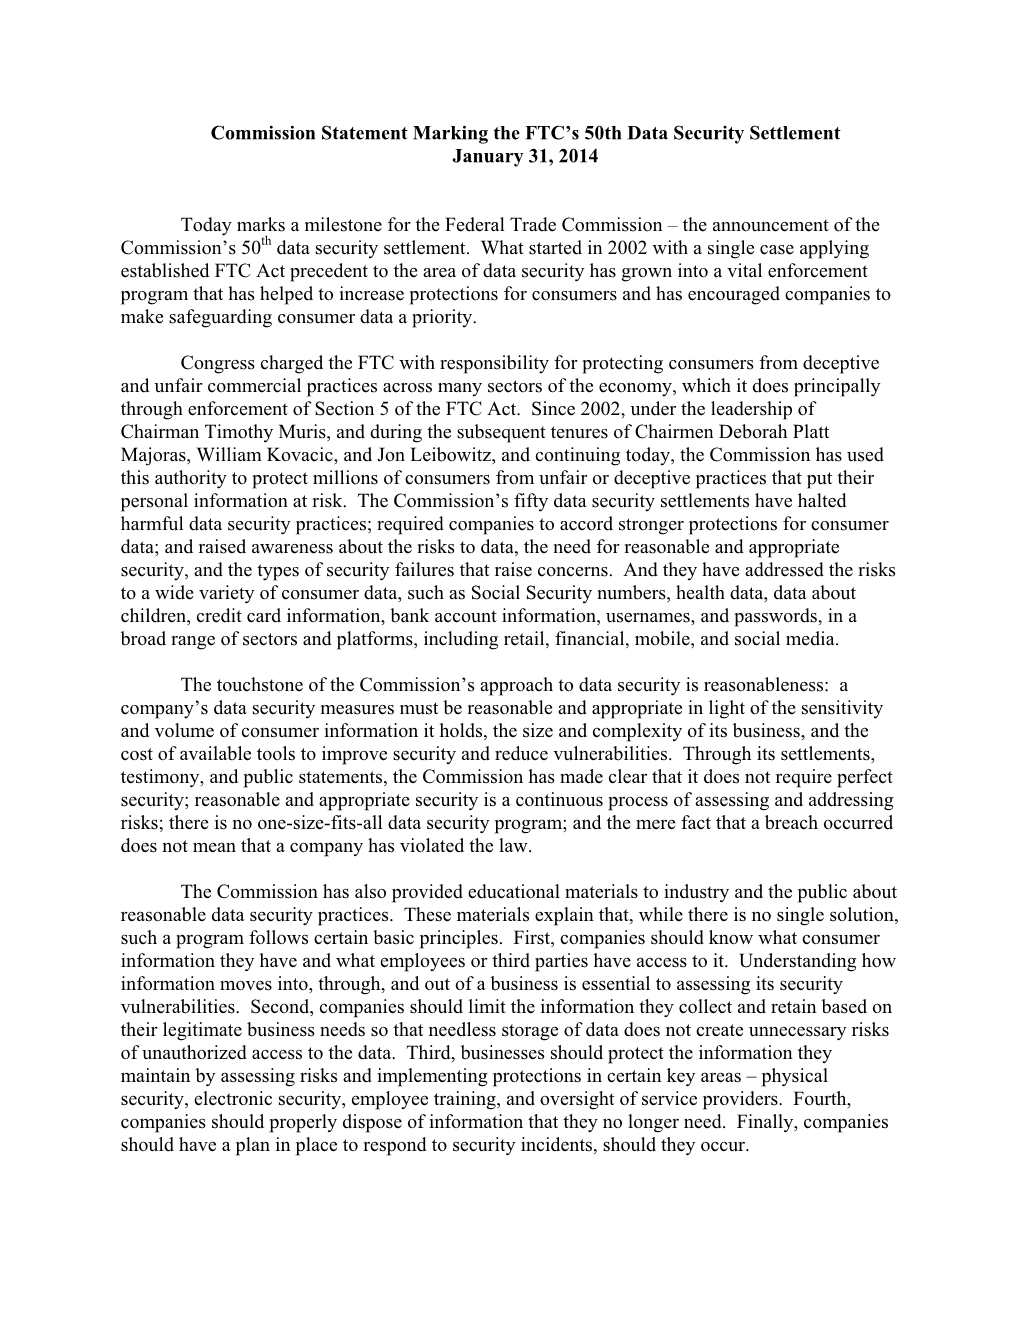 Commission Statement Marking the FTC's 50Th Data Security Settlement